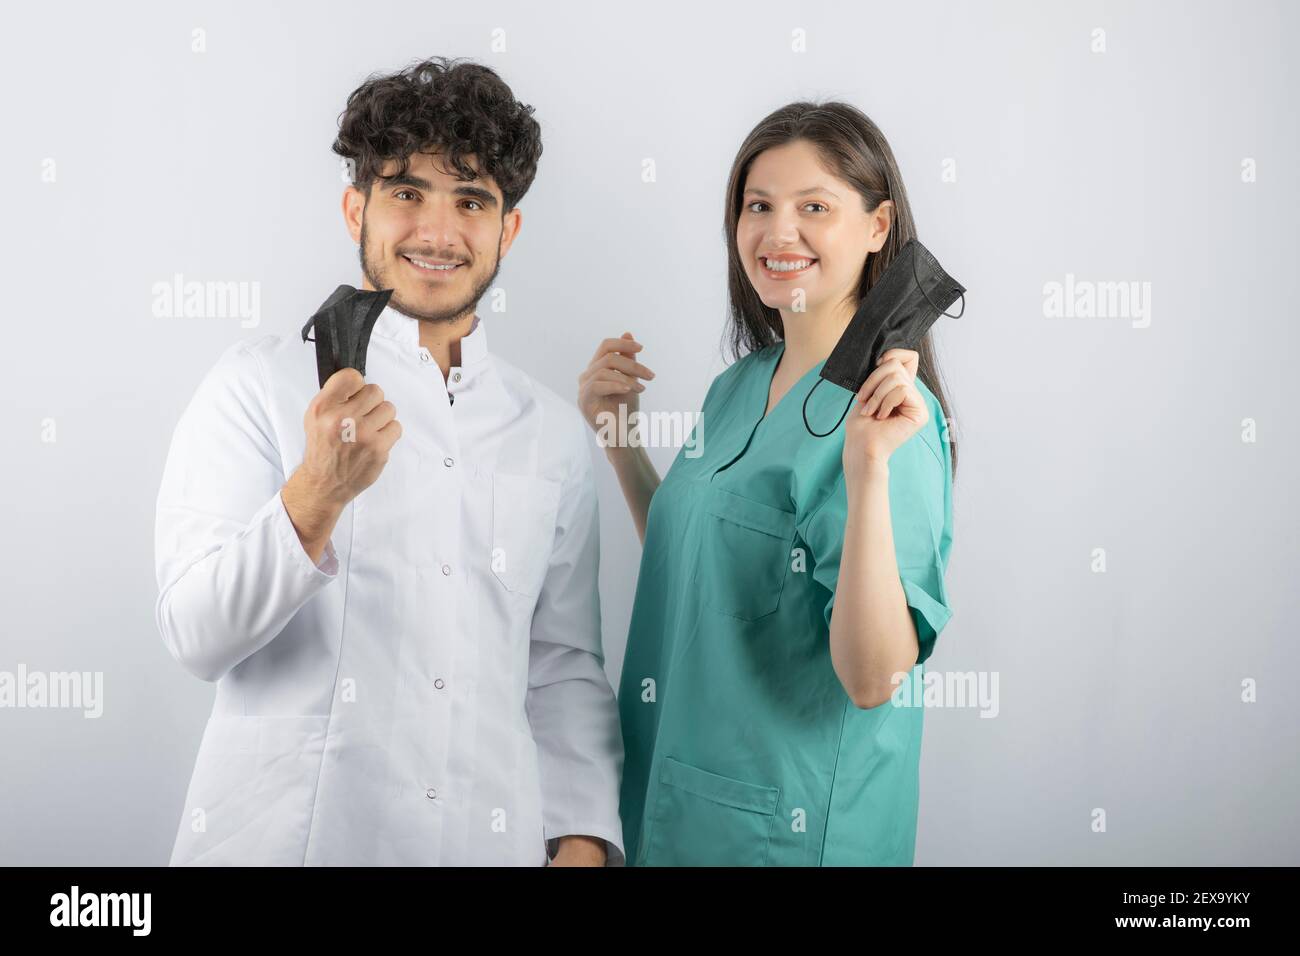 Smiling medical workers holding their masks up Stock Photo